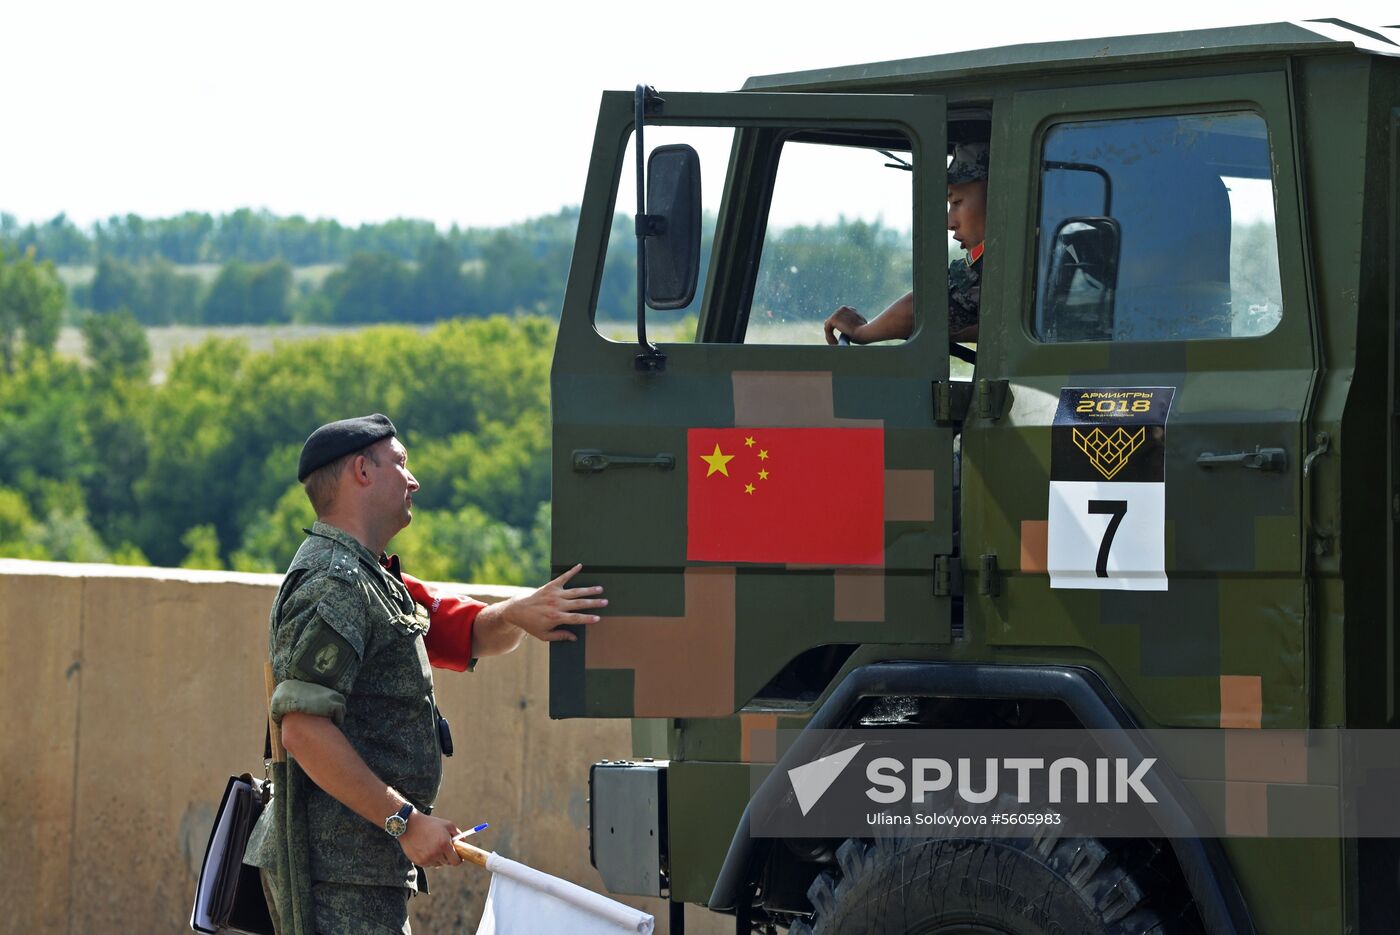 Masters of Armored Vehicles international contest in Voronezh Region